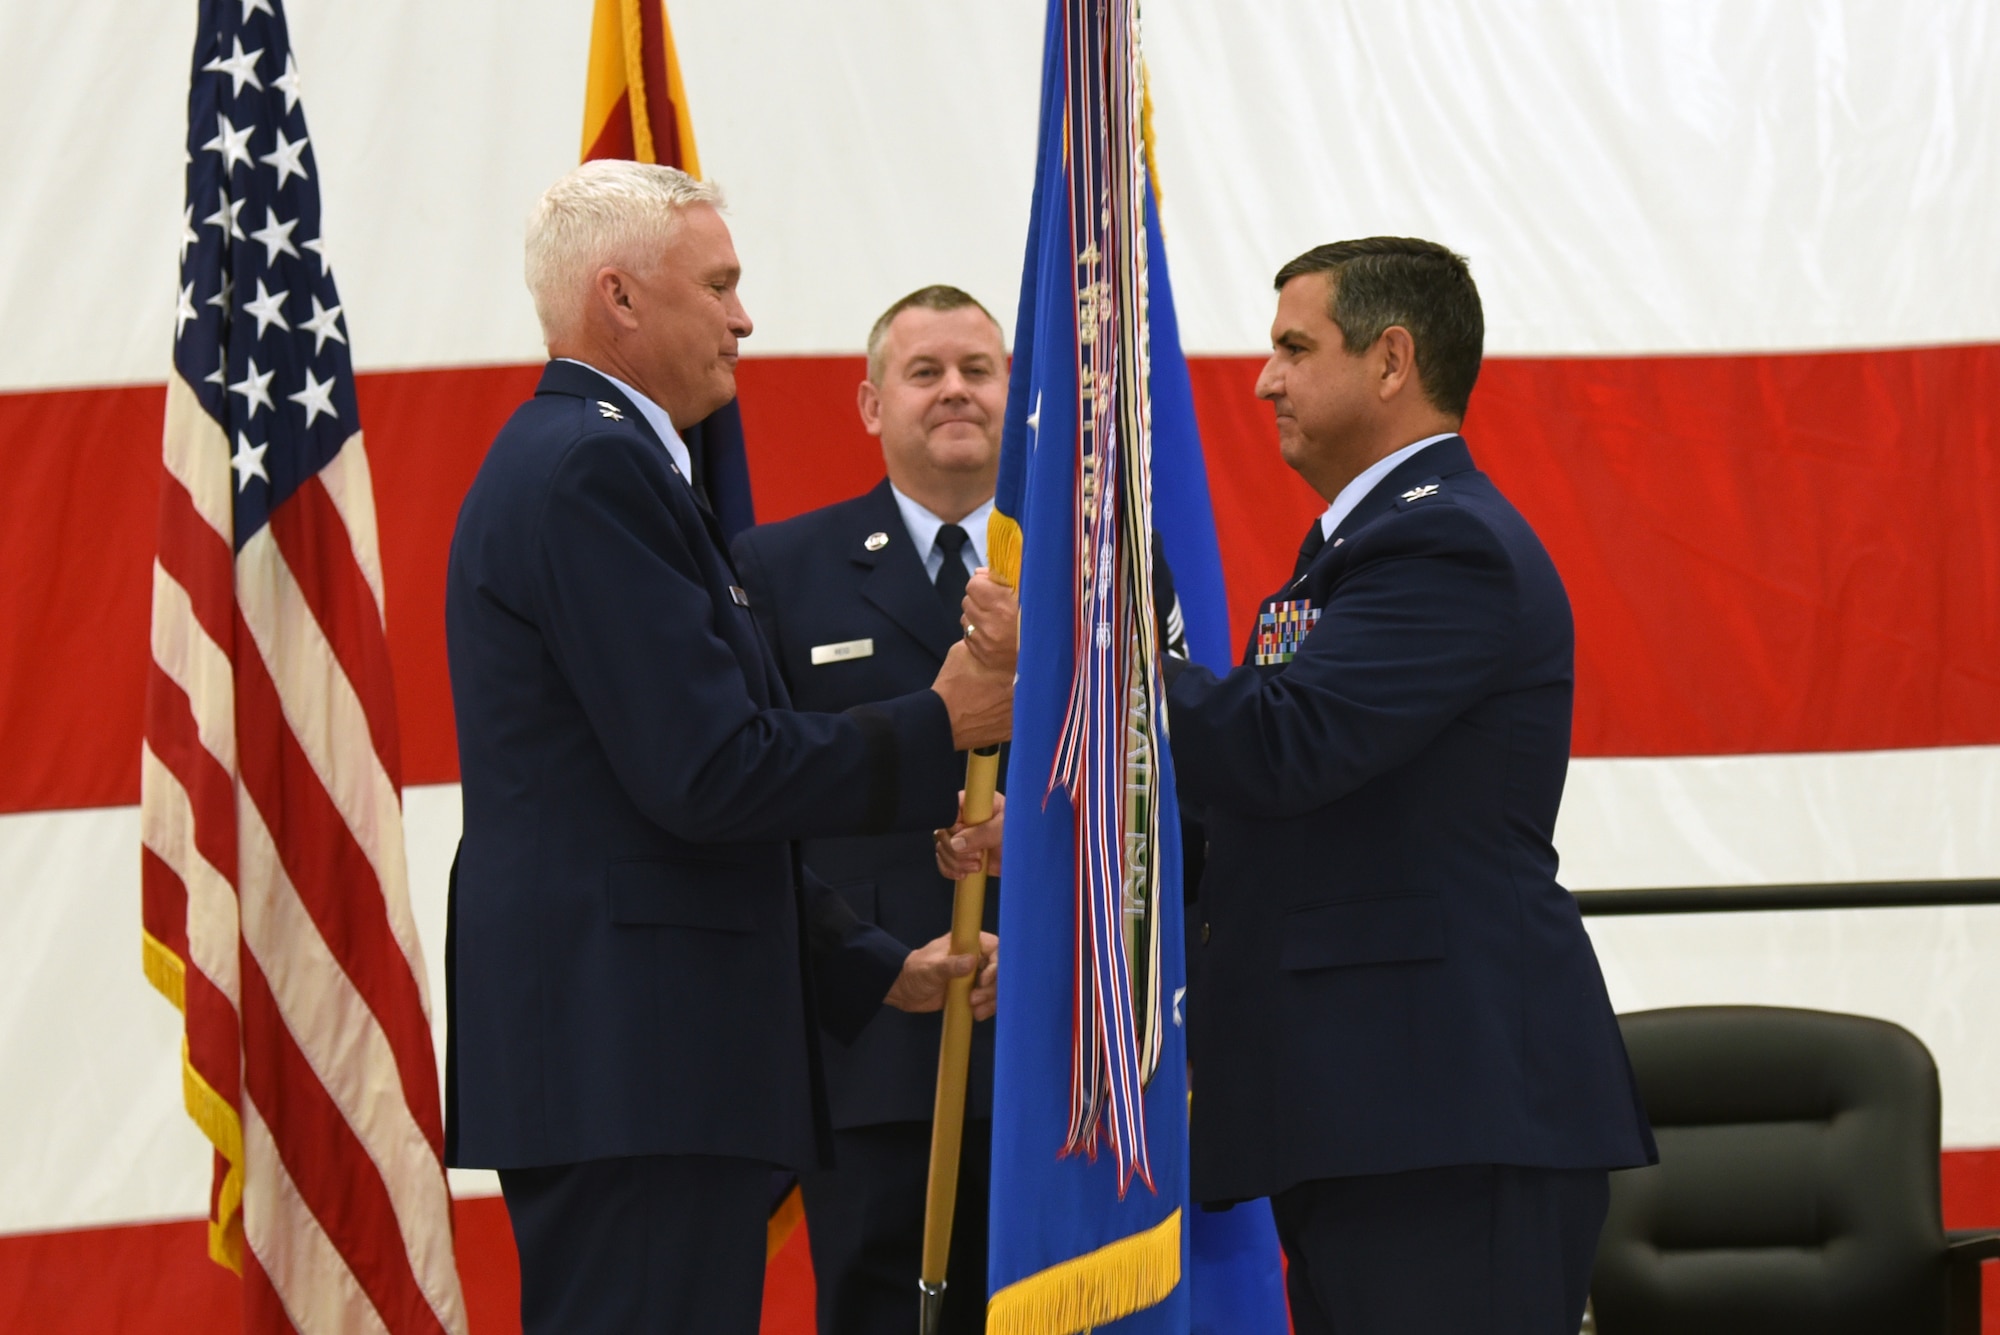 Col. Patrick W. Donaldson accepts the 161st Air Refueling Wing guidon from Maj. Gen. Edward Maxwell, Arizona Air National Guard Air Component Commander,  during the change of command ceremony at Goldwater Air National Guard Base, Jan. 7, 2017.